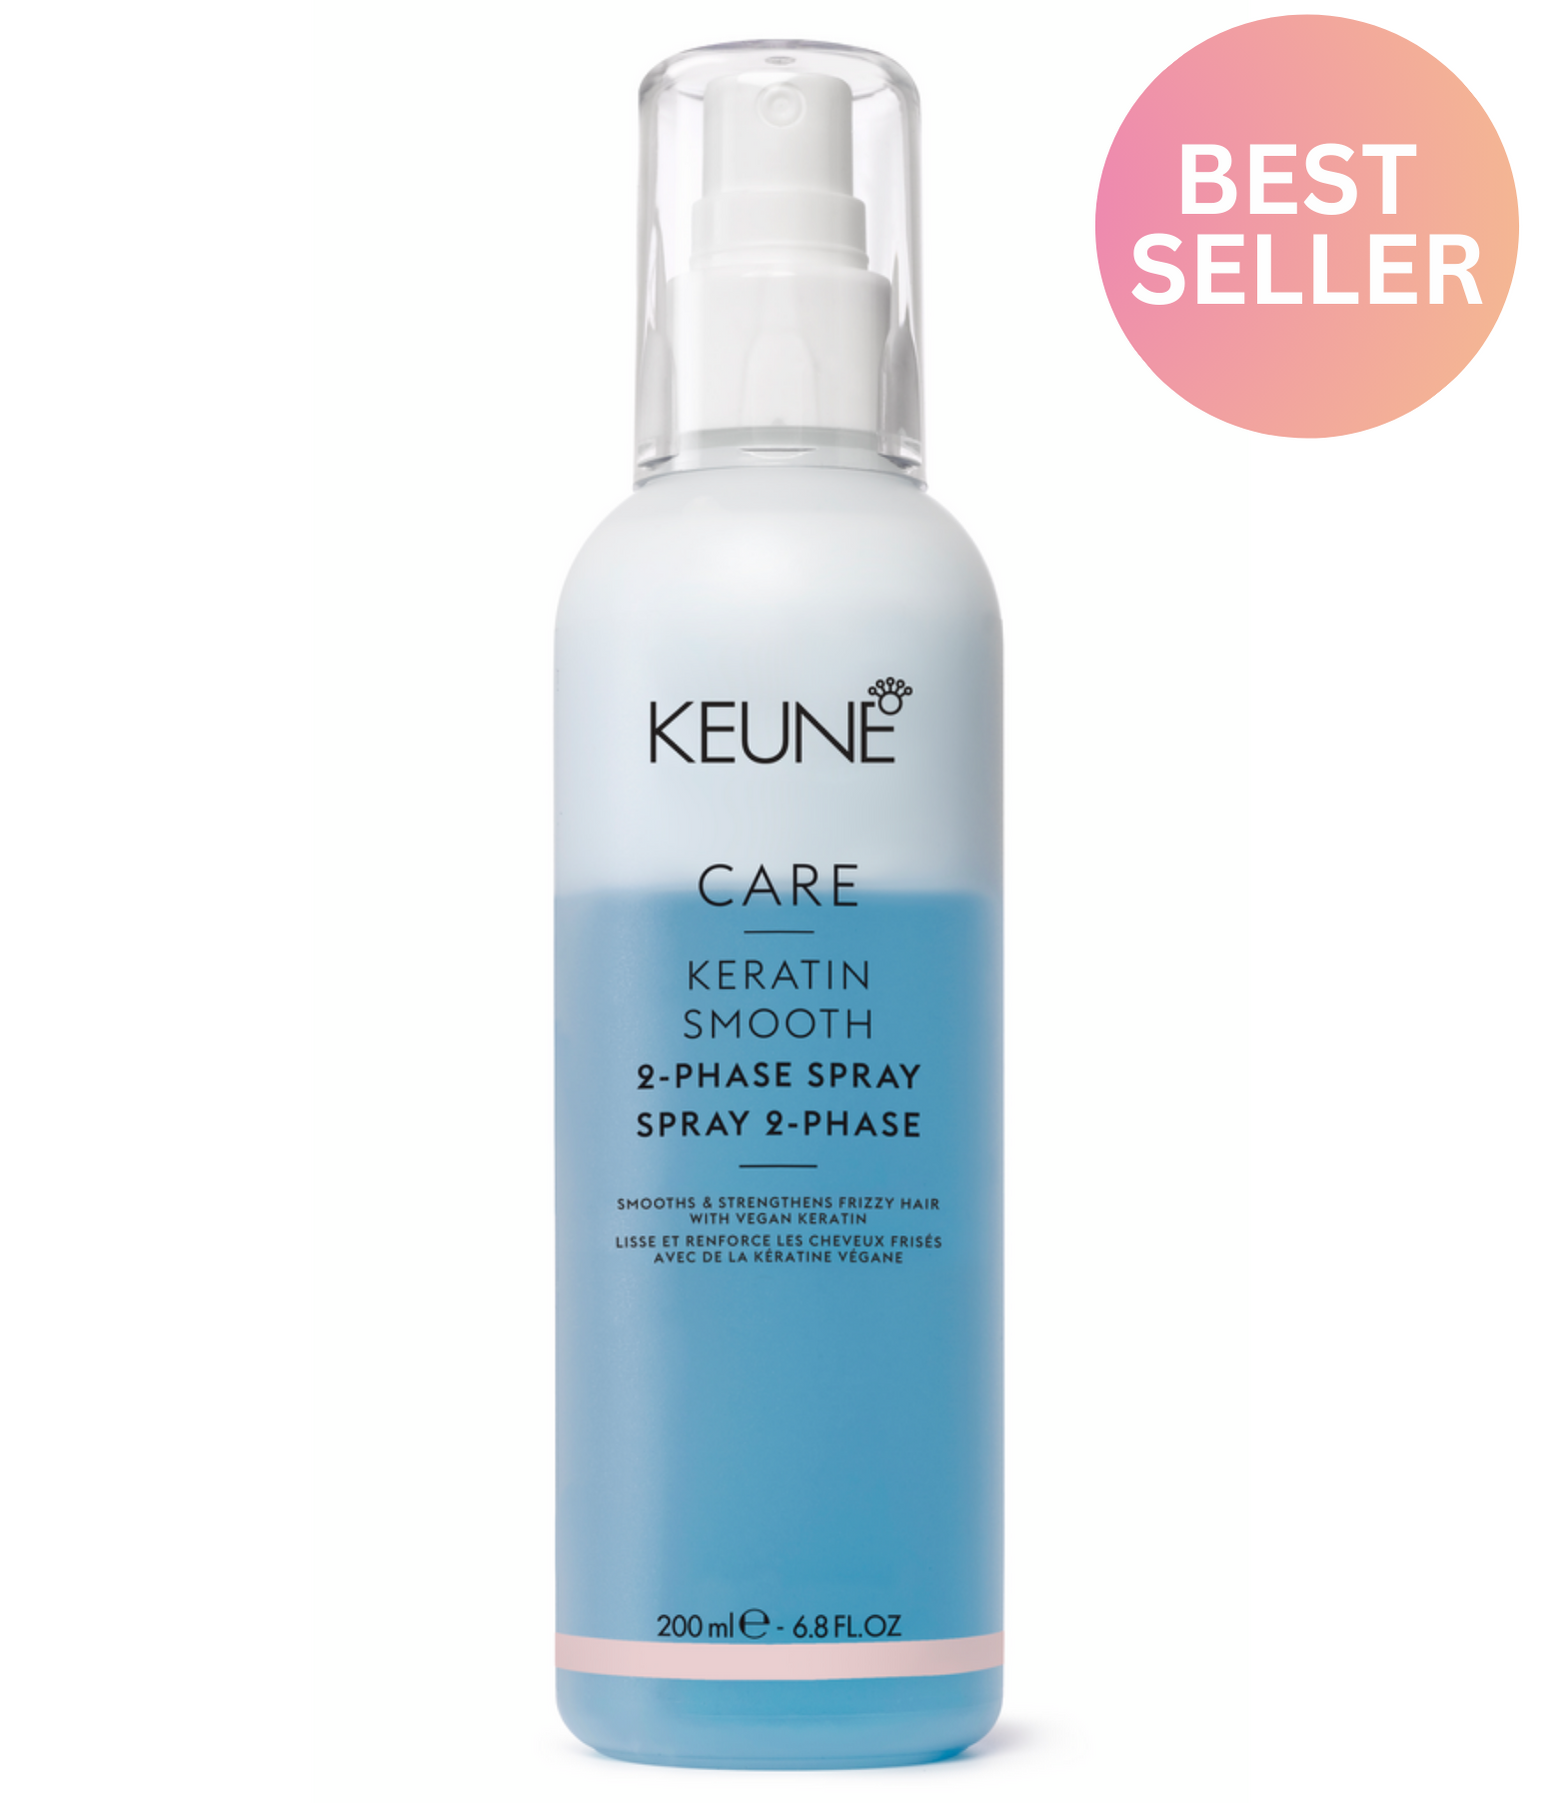 Explore the CARE KERATIN SMOOTH 2-PHASE SPRAY - Your ticket to smooth, shiny hair! Effective conditioner and anti-frizz problem-solving for instant results. Keune.ch.